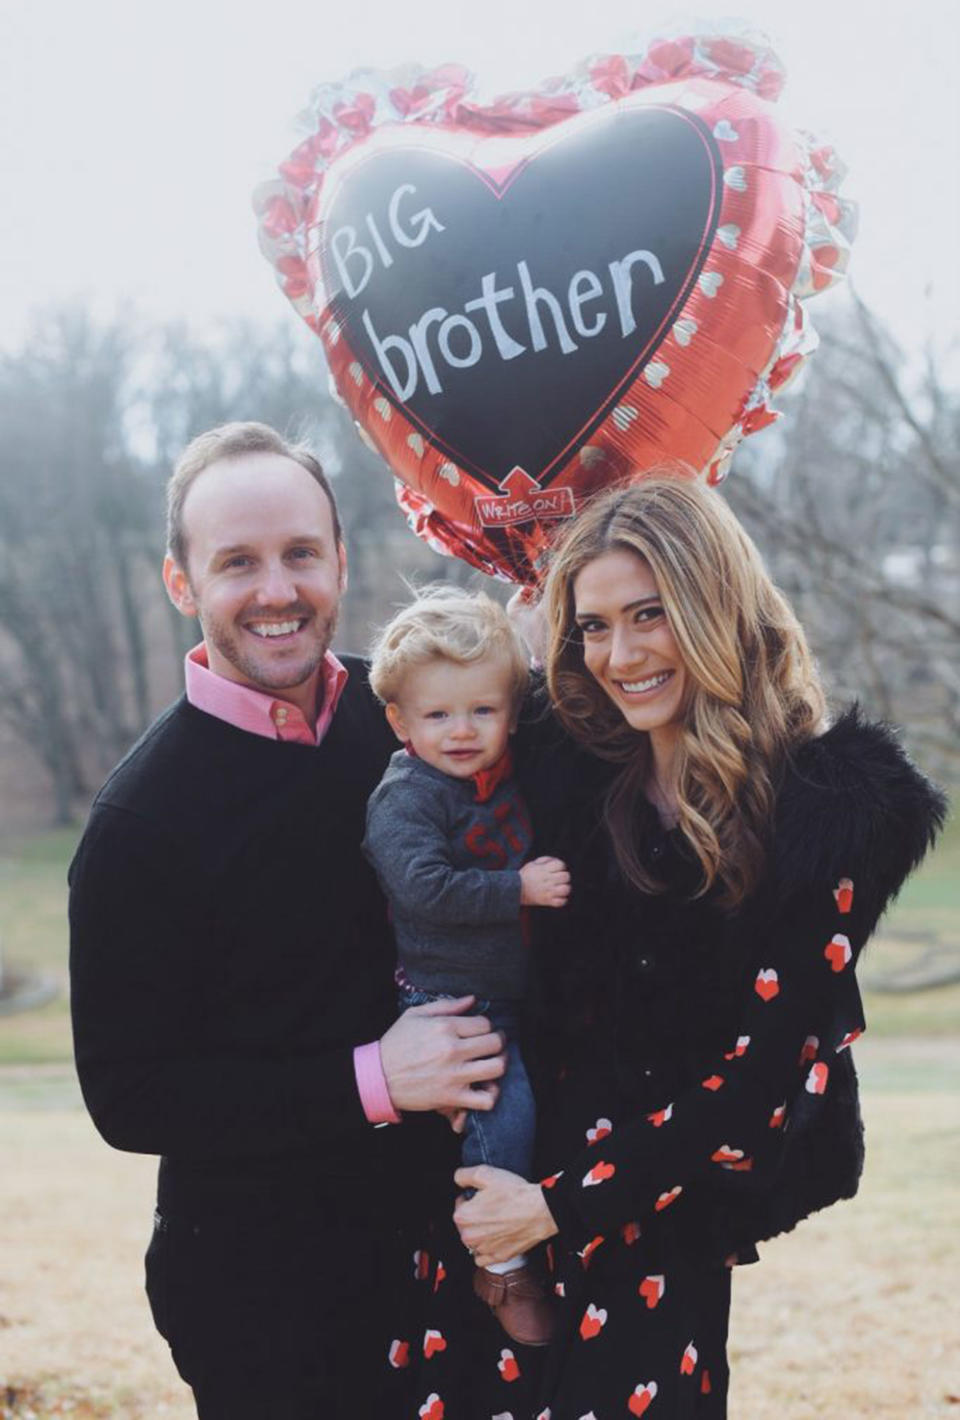 <p>Two-time <em>Bachelor</em> contestant Kacie Boguskie Gaston and husband Rusty welcomed their second child, a baby girl, on August 8, <span>she announced on Instagram</span>. “Just when we thought we couldn’t love anymore, our hearts doubled in size,” the new mom of two captioned a sweet snap of her newborn sleeping.</p>